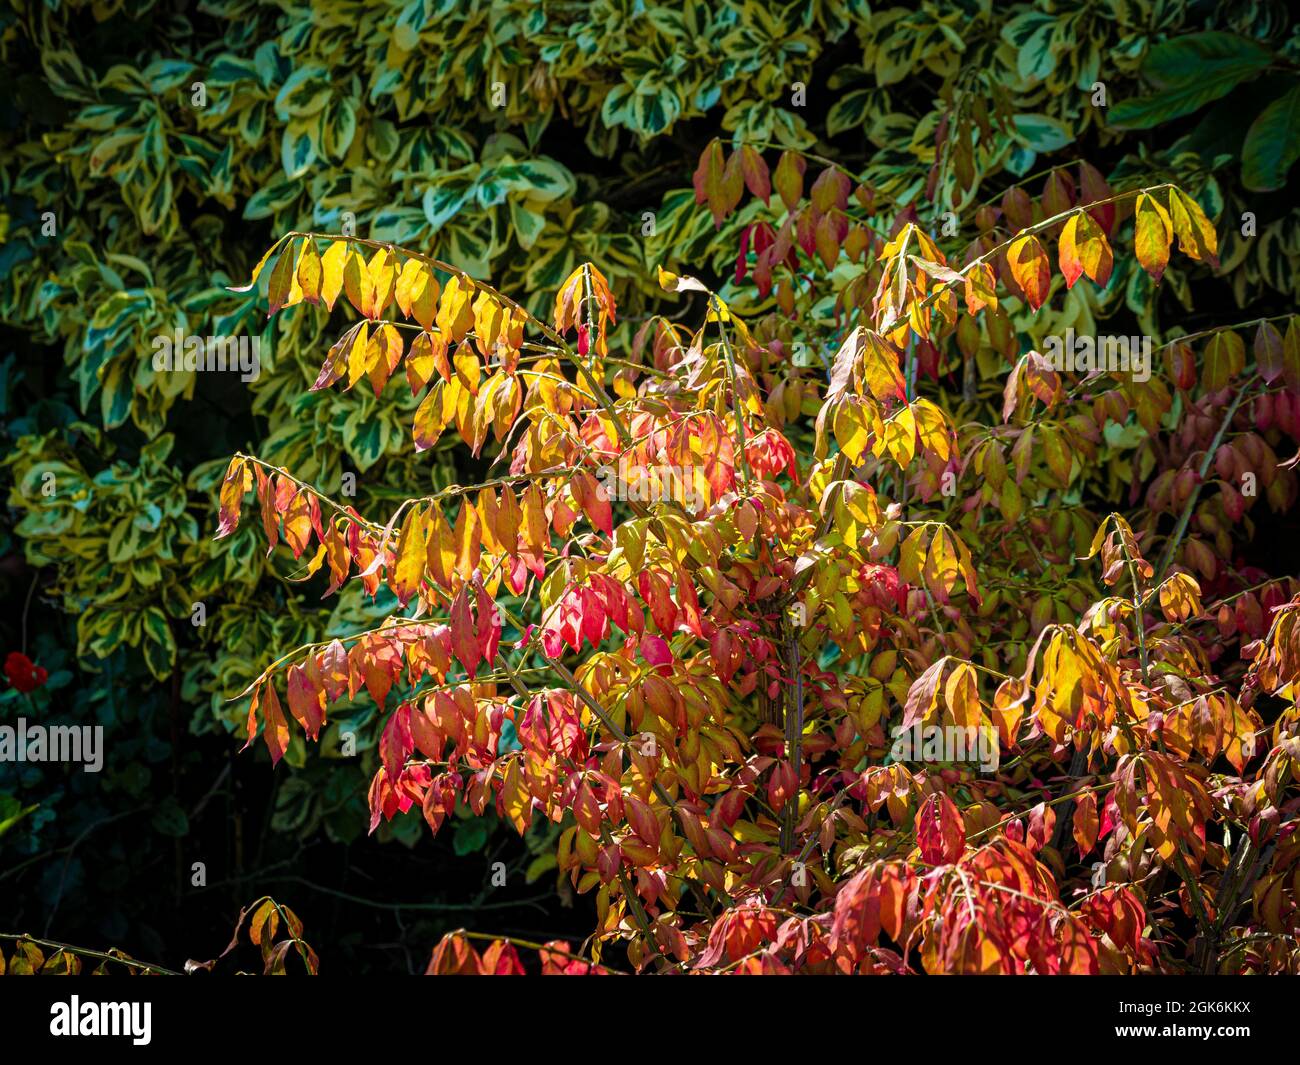 Vibrant leaves of Euonymous Alatus - Burning Bush Euonymus with an evergreen variegated euonymous behind. Stock Photo